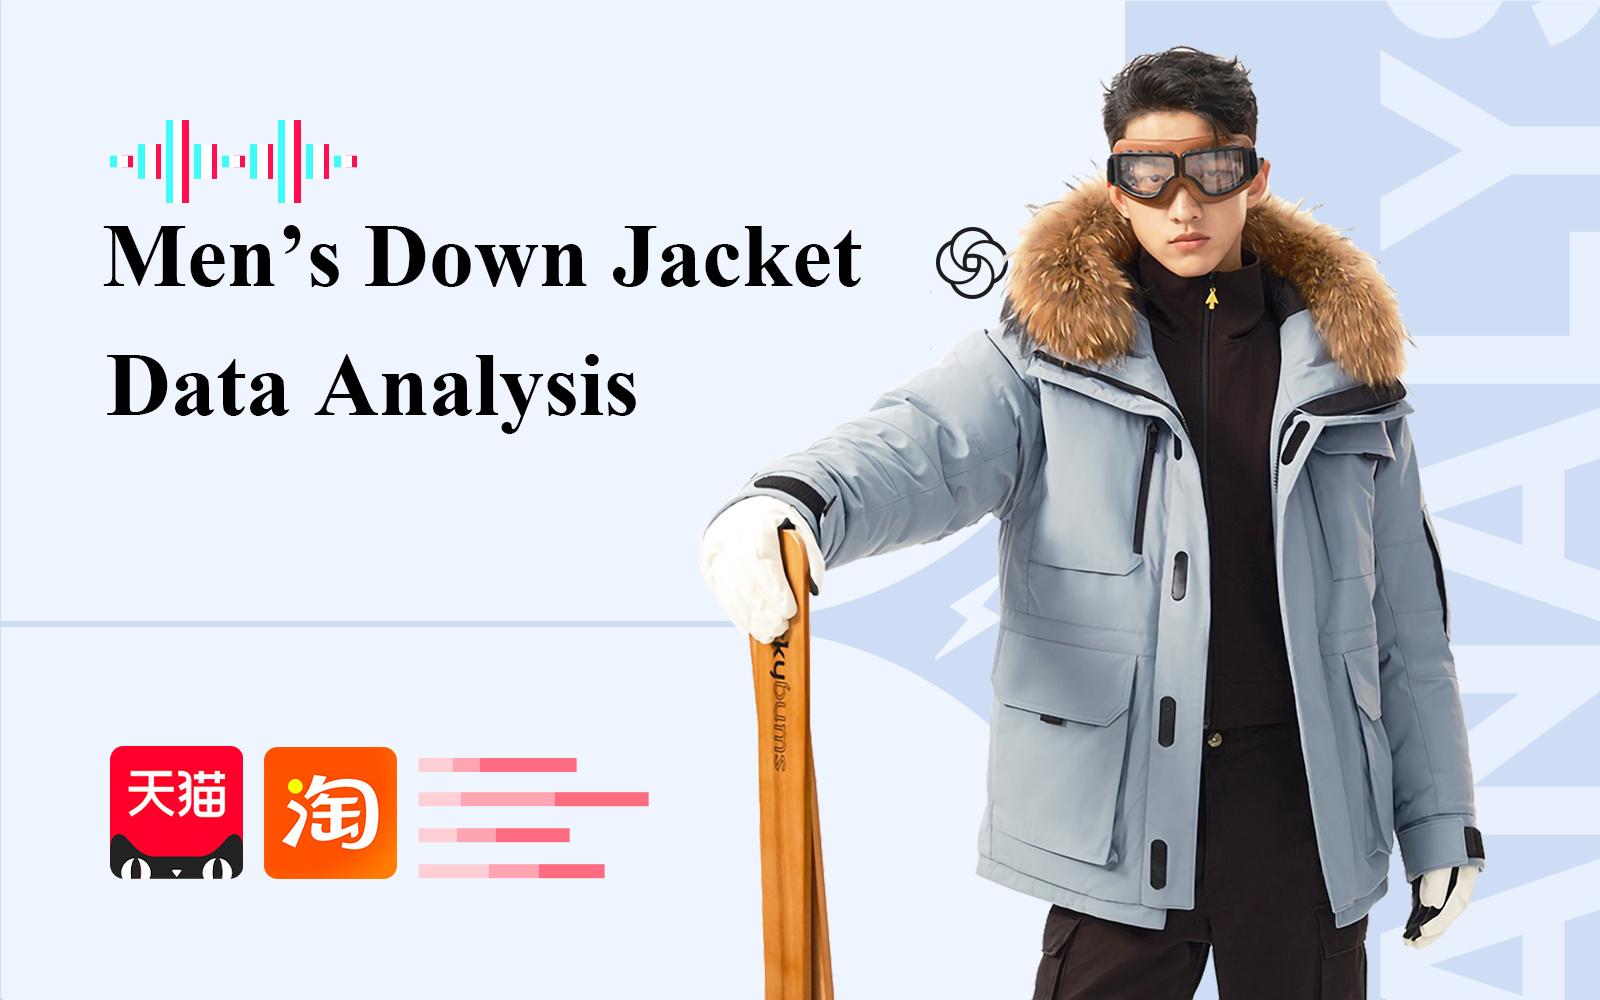 Down Jacket -- The Data Analysis of Menswear E-Commerce